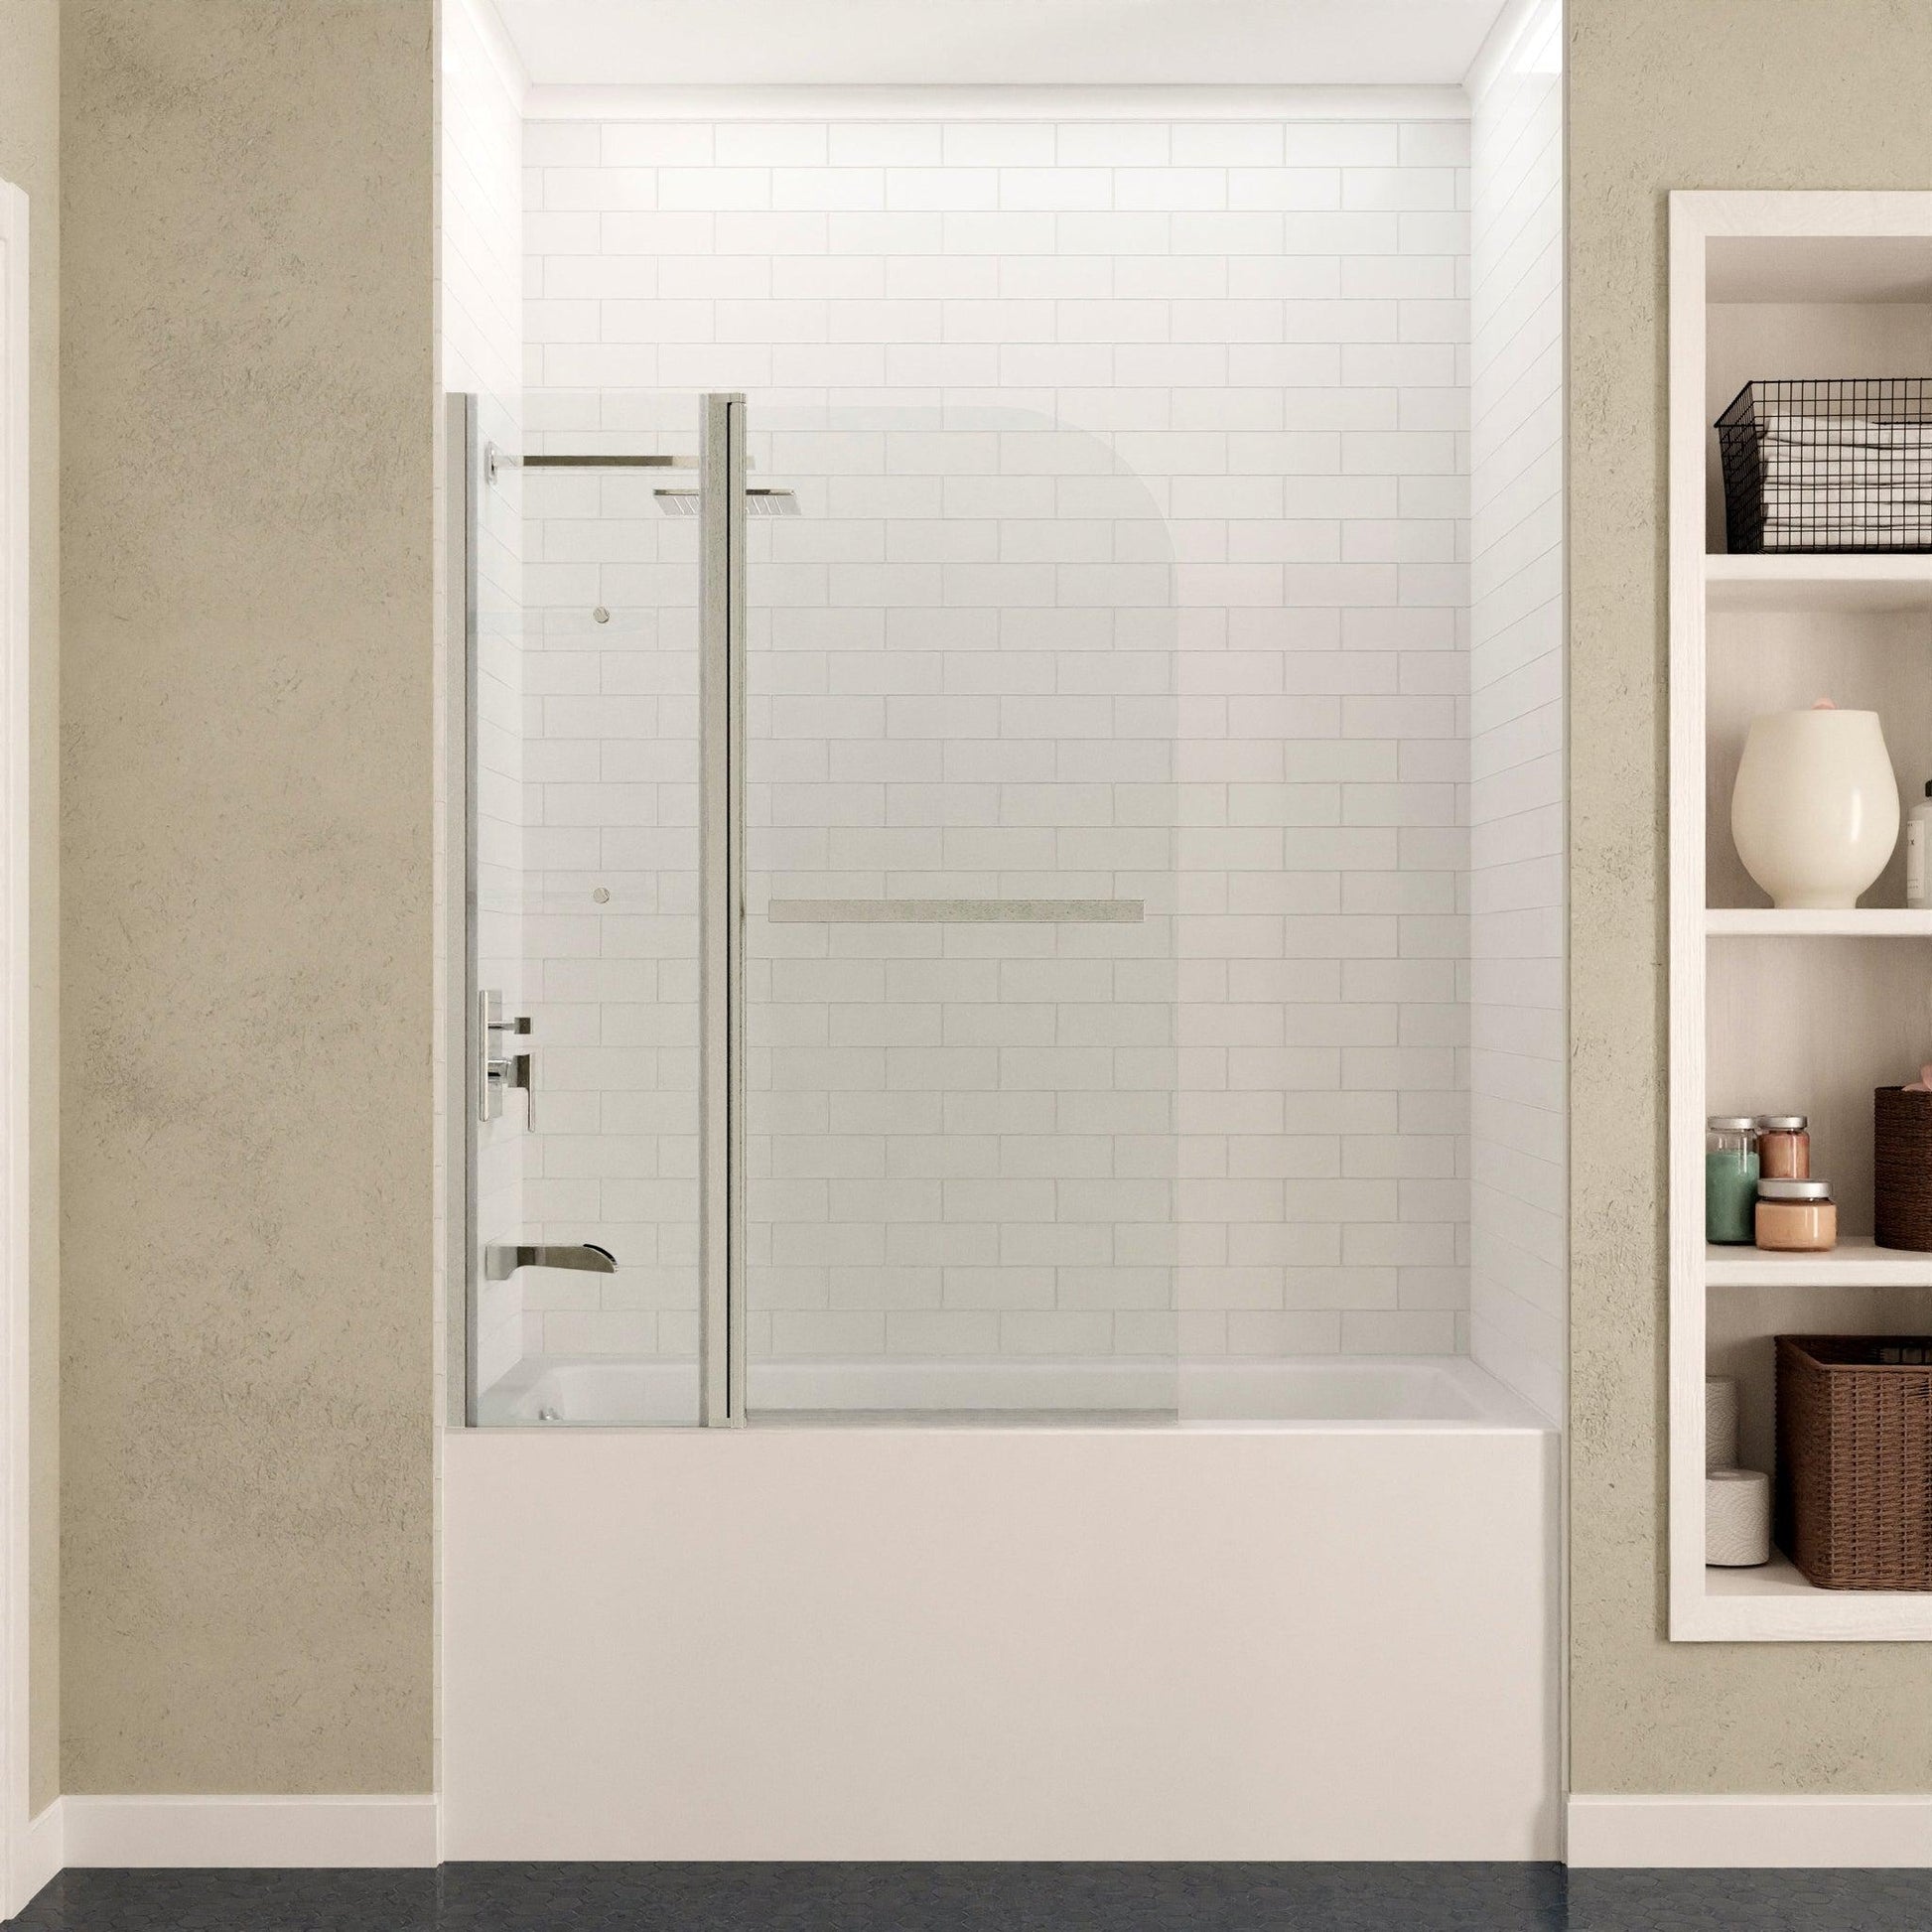 ANZZI Galleon Series White "60 x 32" Alcove Left Drain Rectangular Bathtub With Built-In Flange and Frameless Brushed Nickel Hinged Door